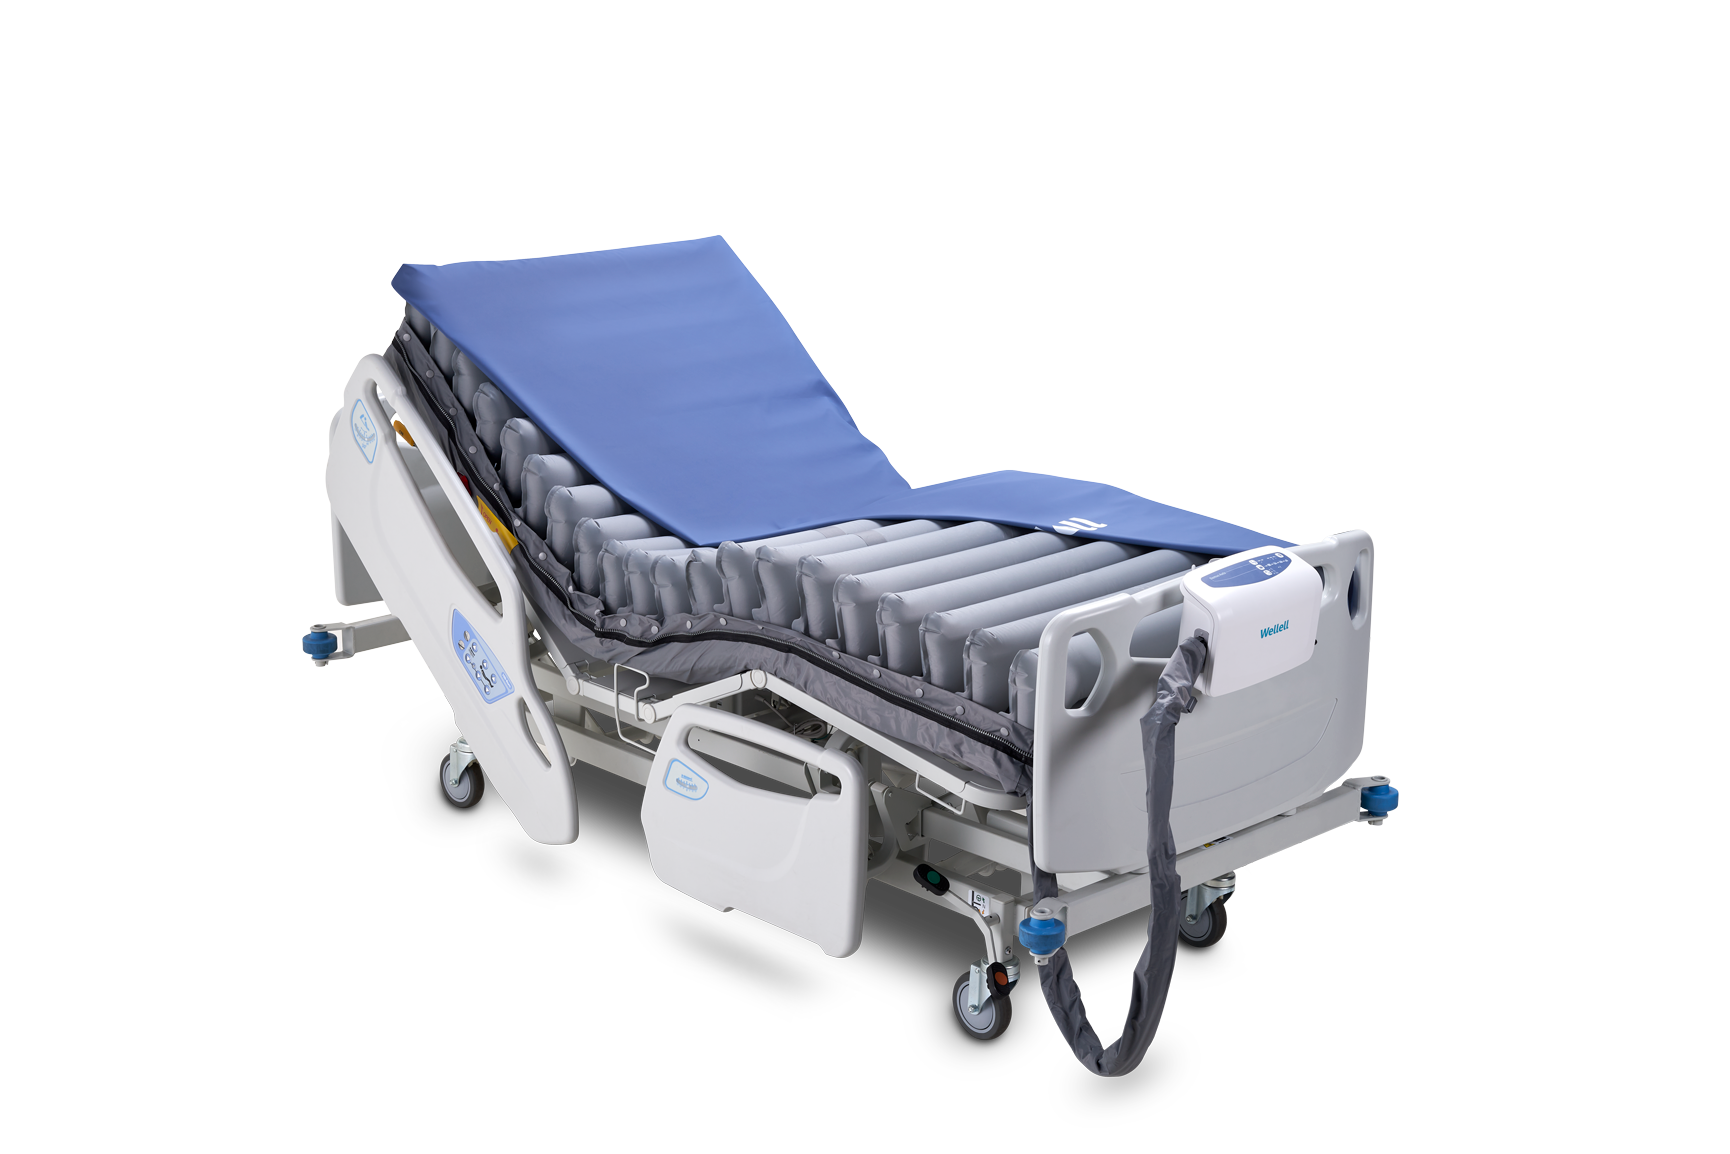 Domus Auto - Medical Bed - US Wellell